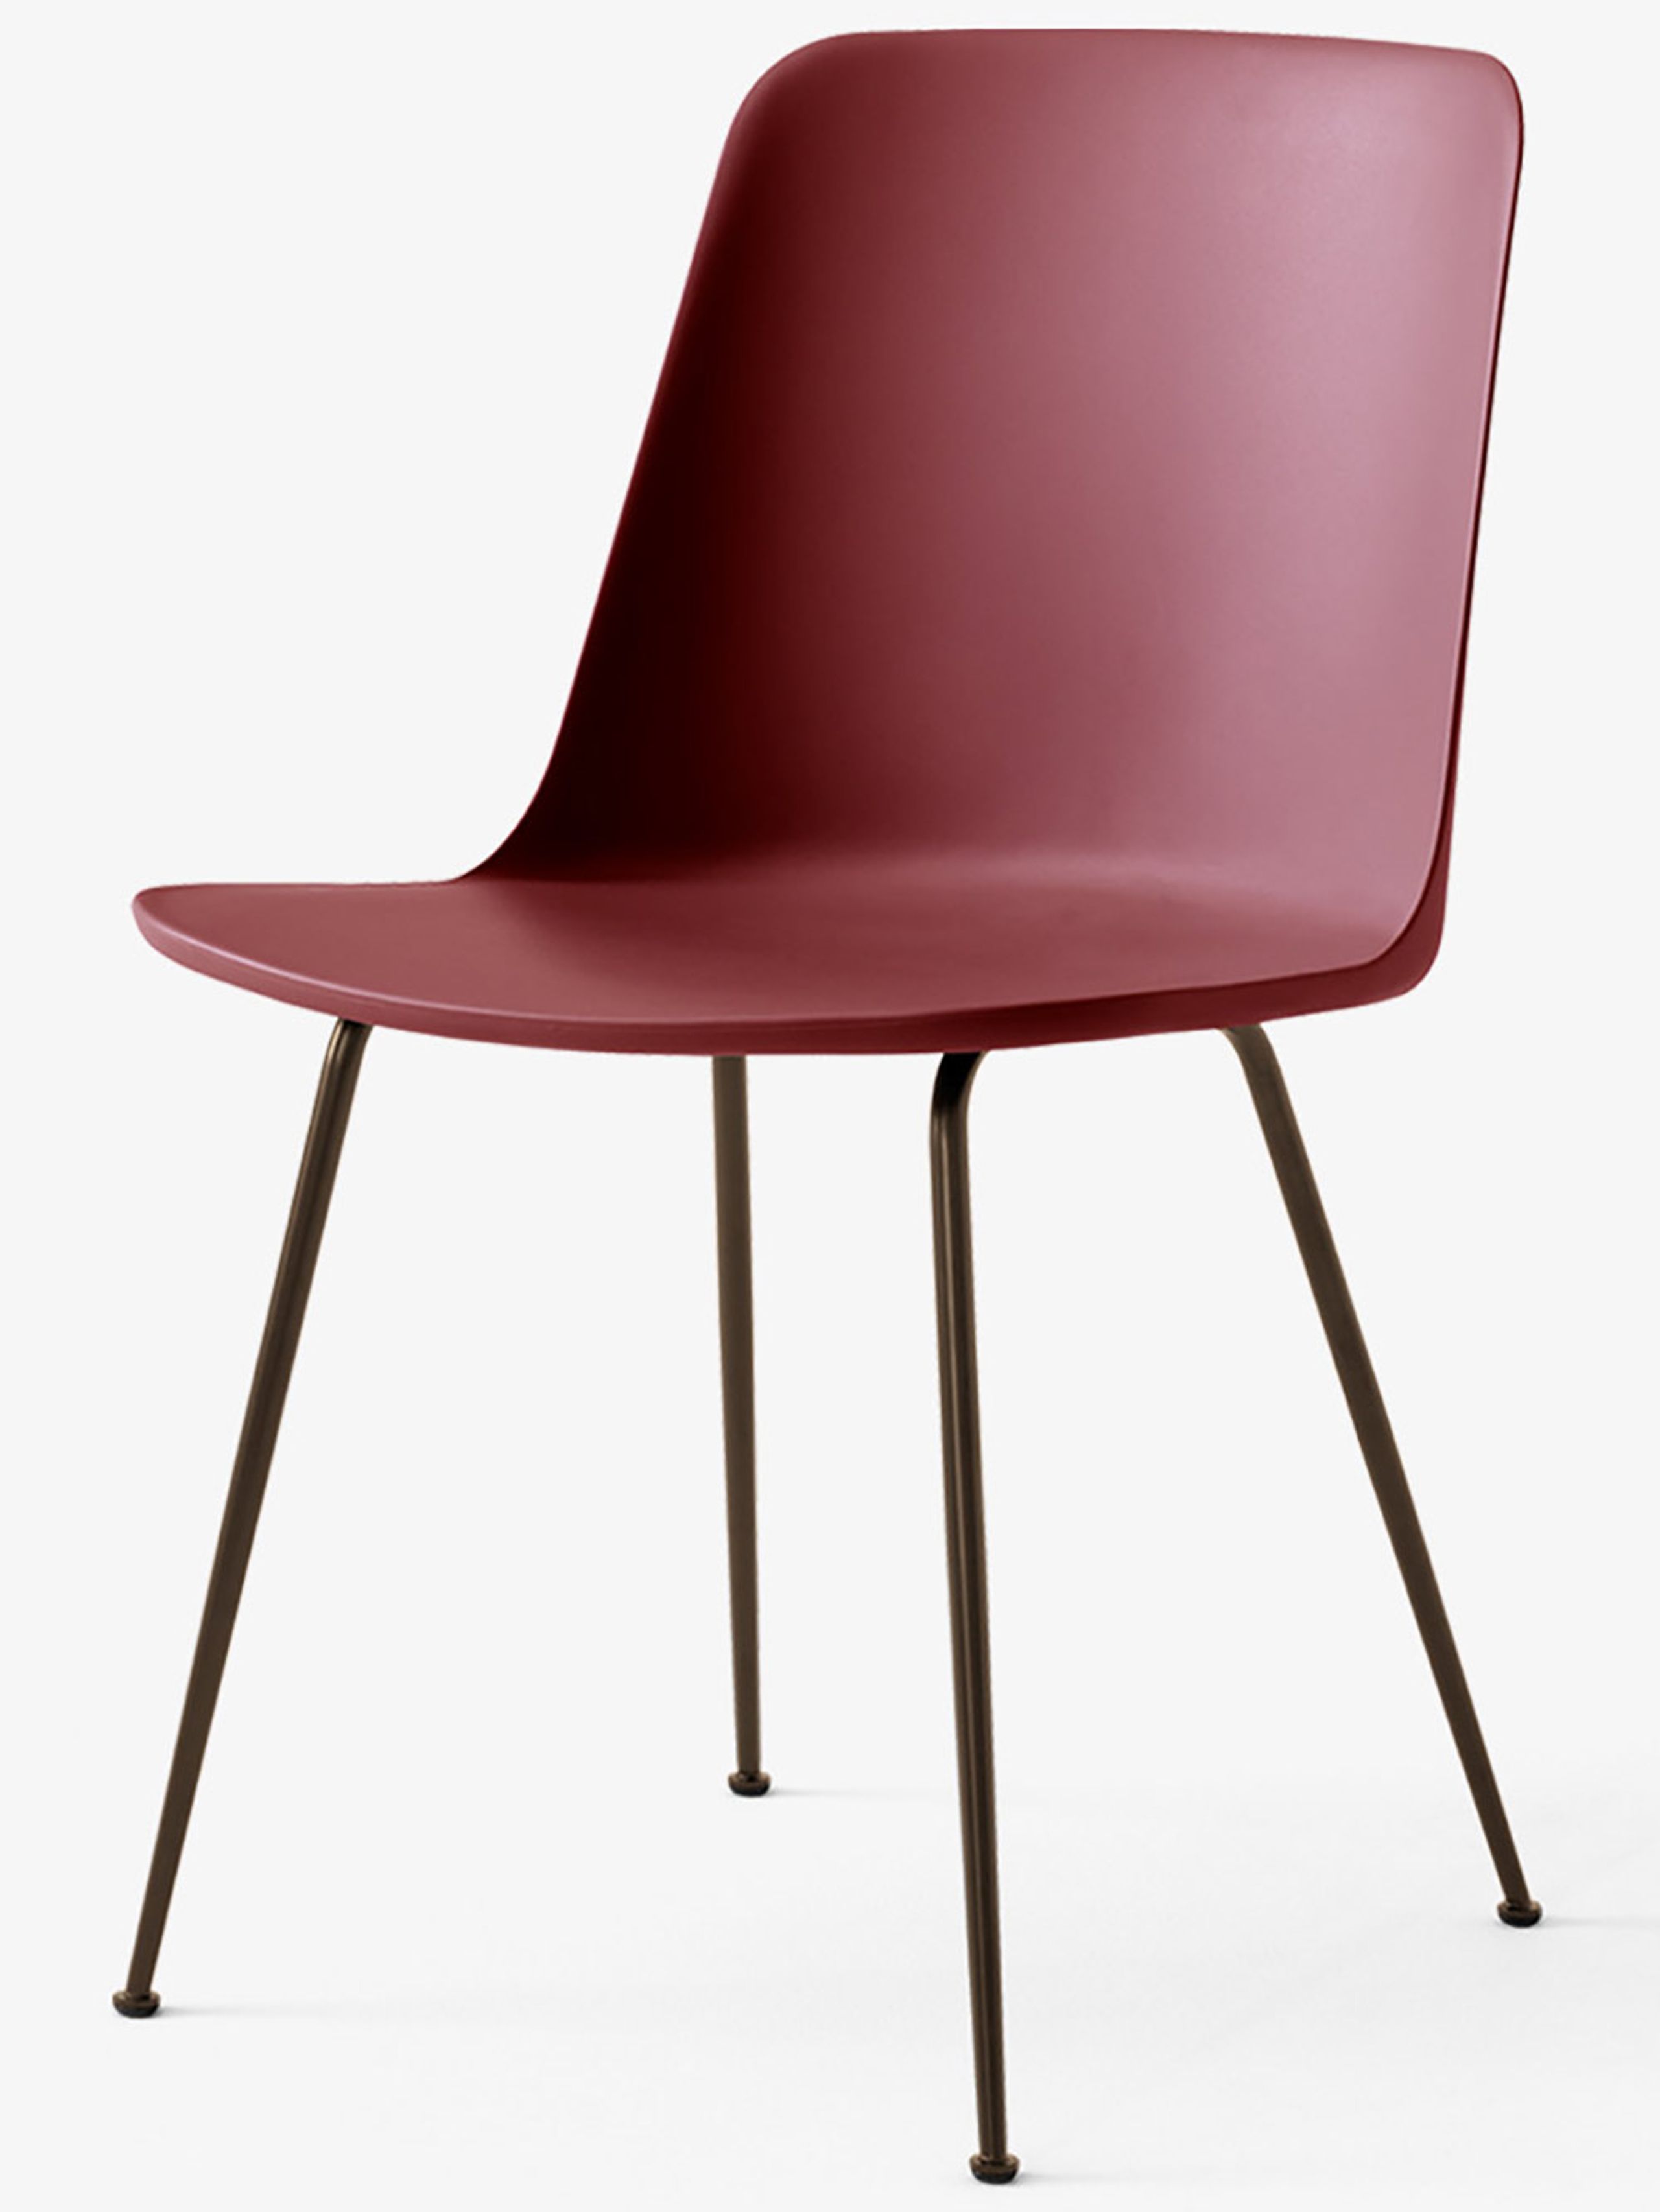 &tradition -  - Rely - HW6 - Seat: Red Brown